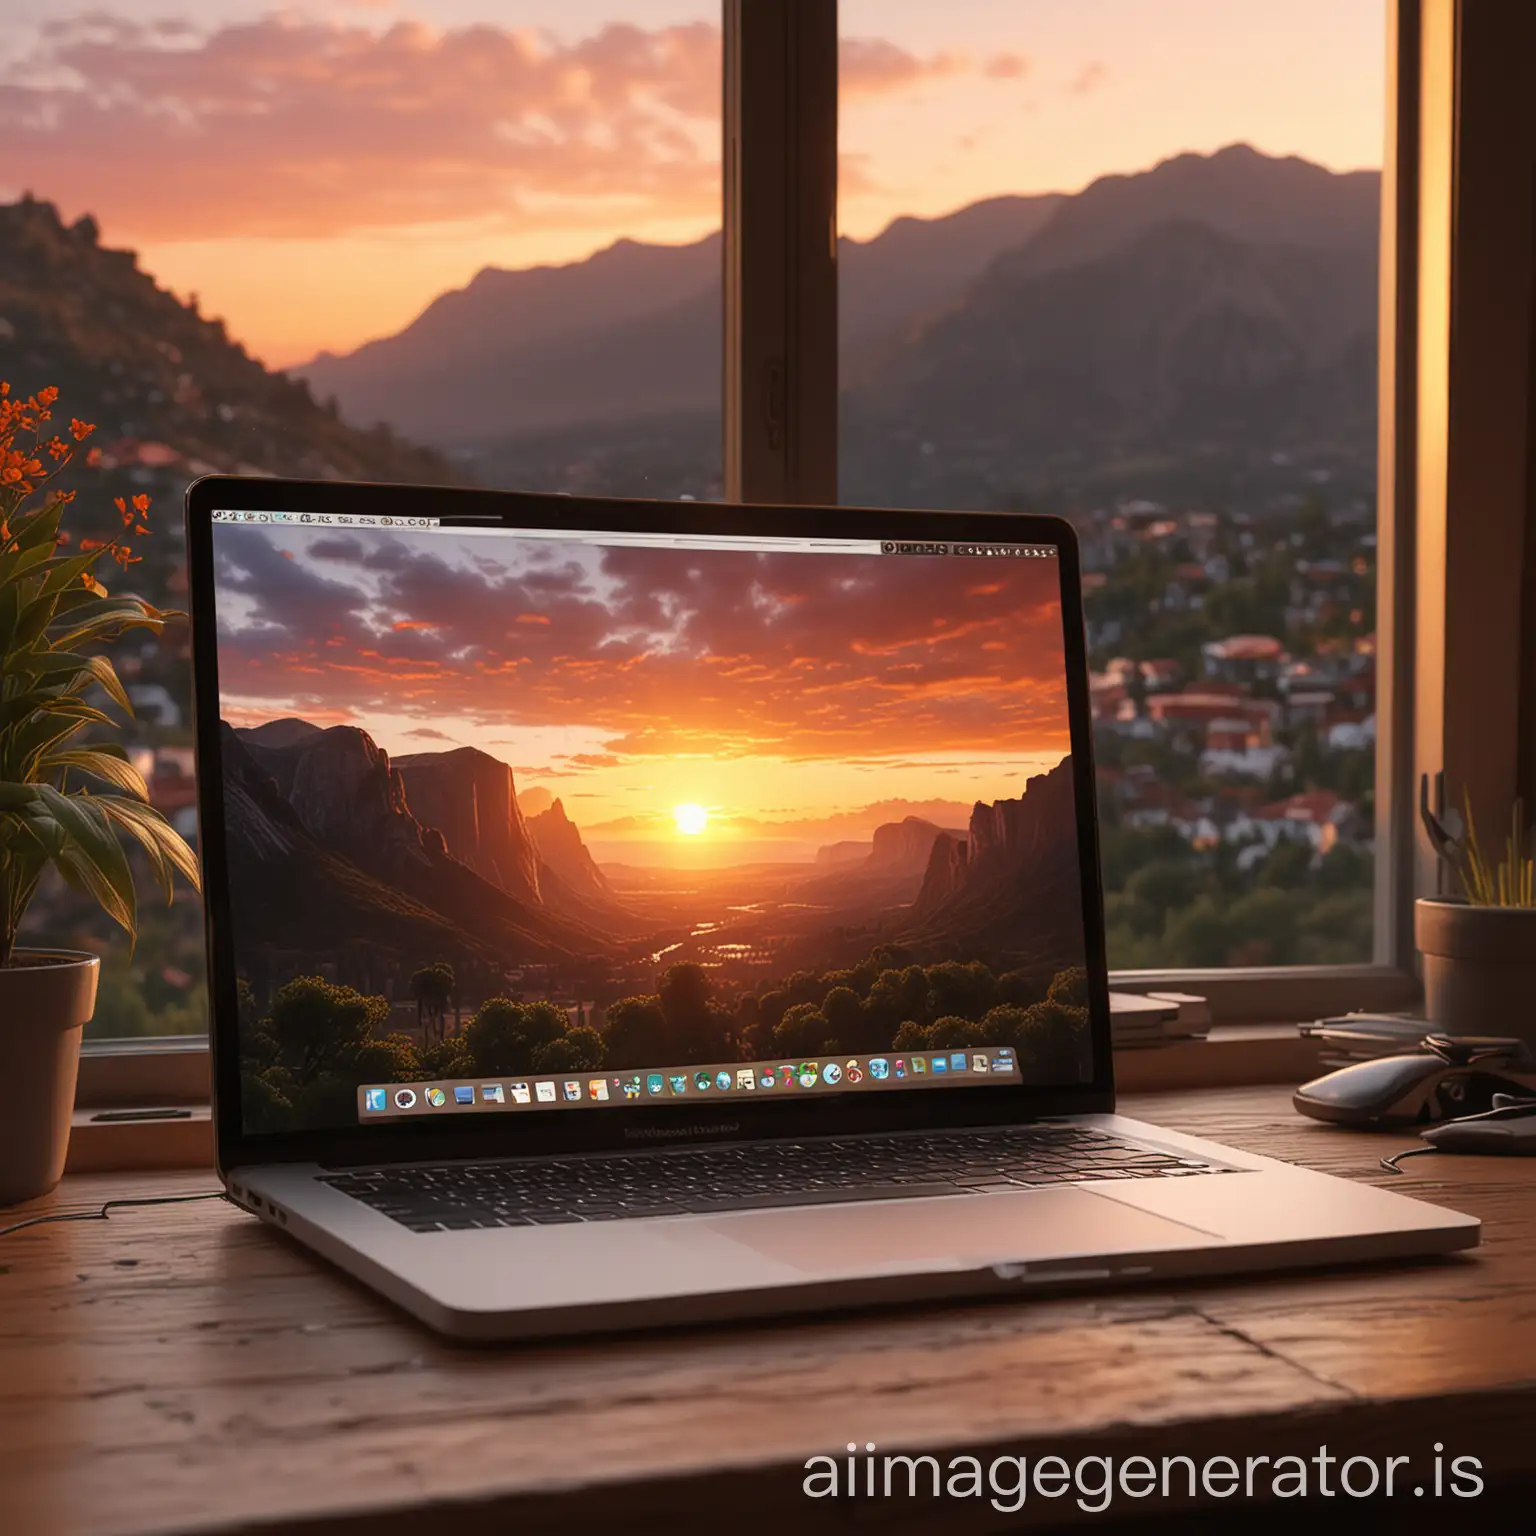 Cozy-Sunset-Scene-MacBook-on-Table-with-Screen-Off